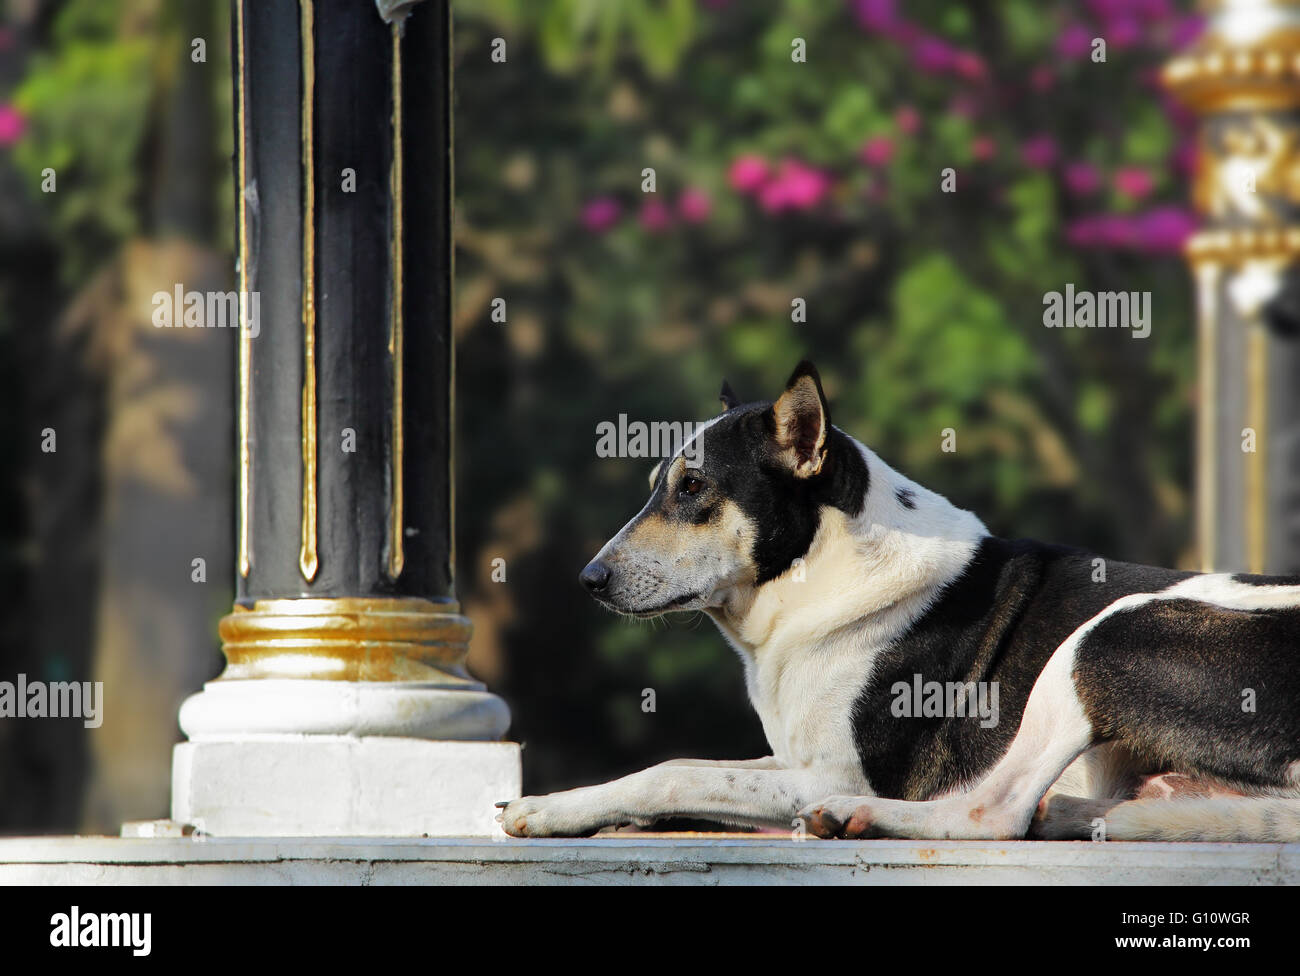 Alert and vigilant black and white dog on watch duty. Stock Photo